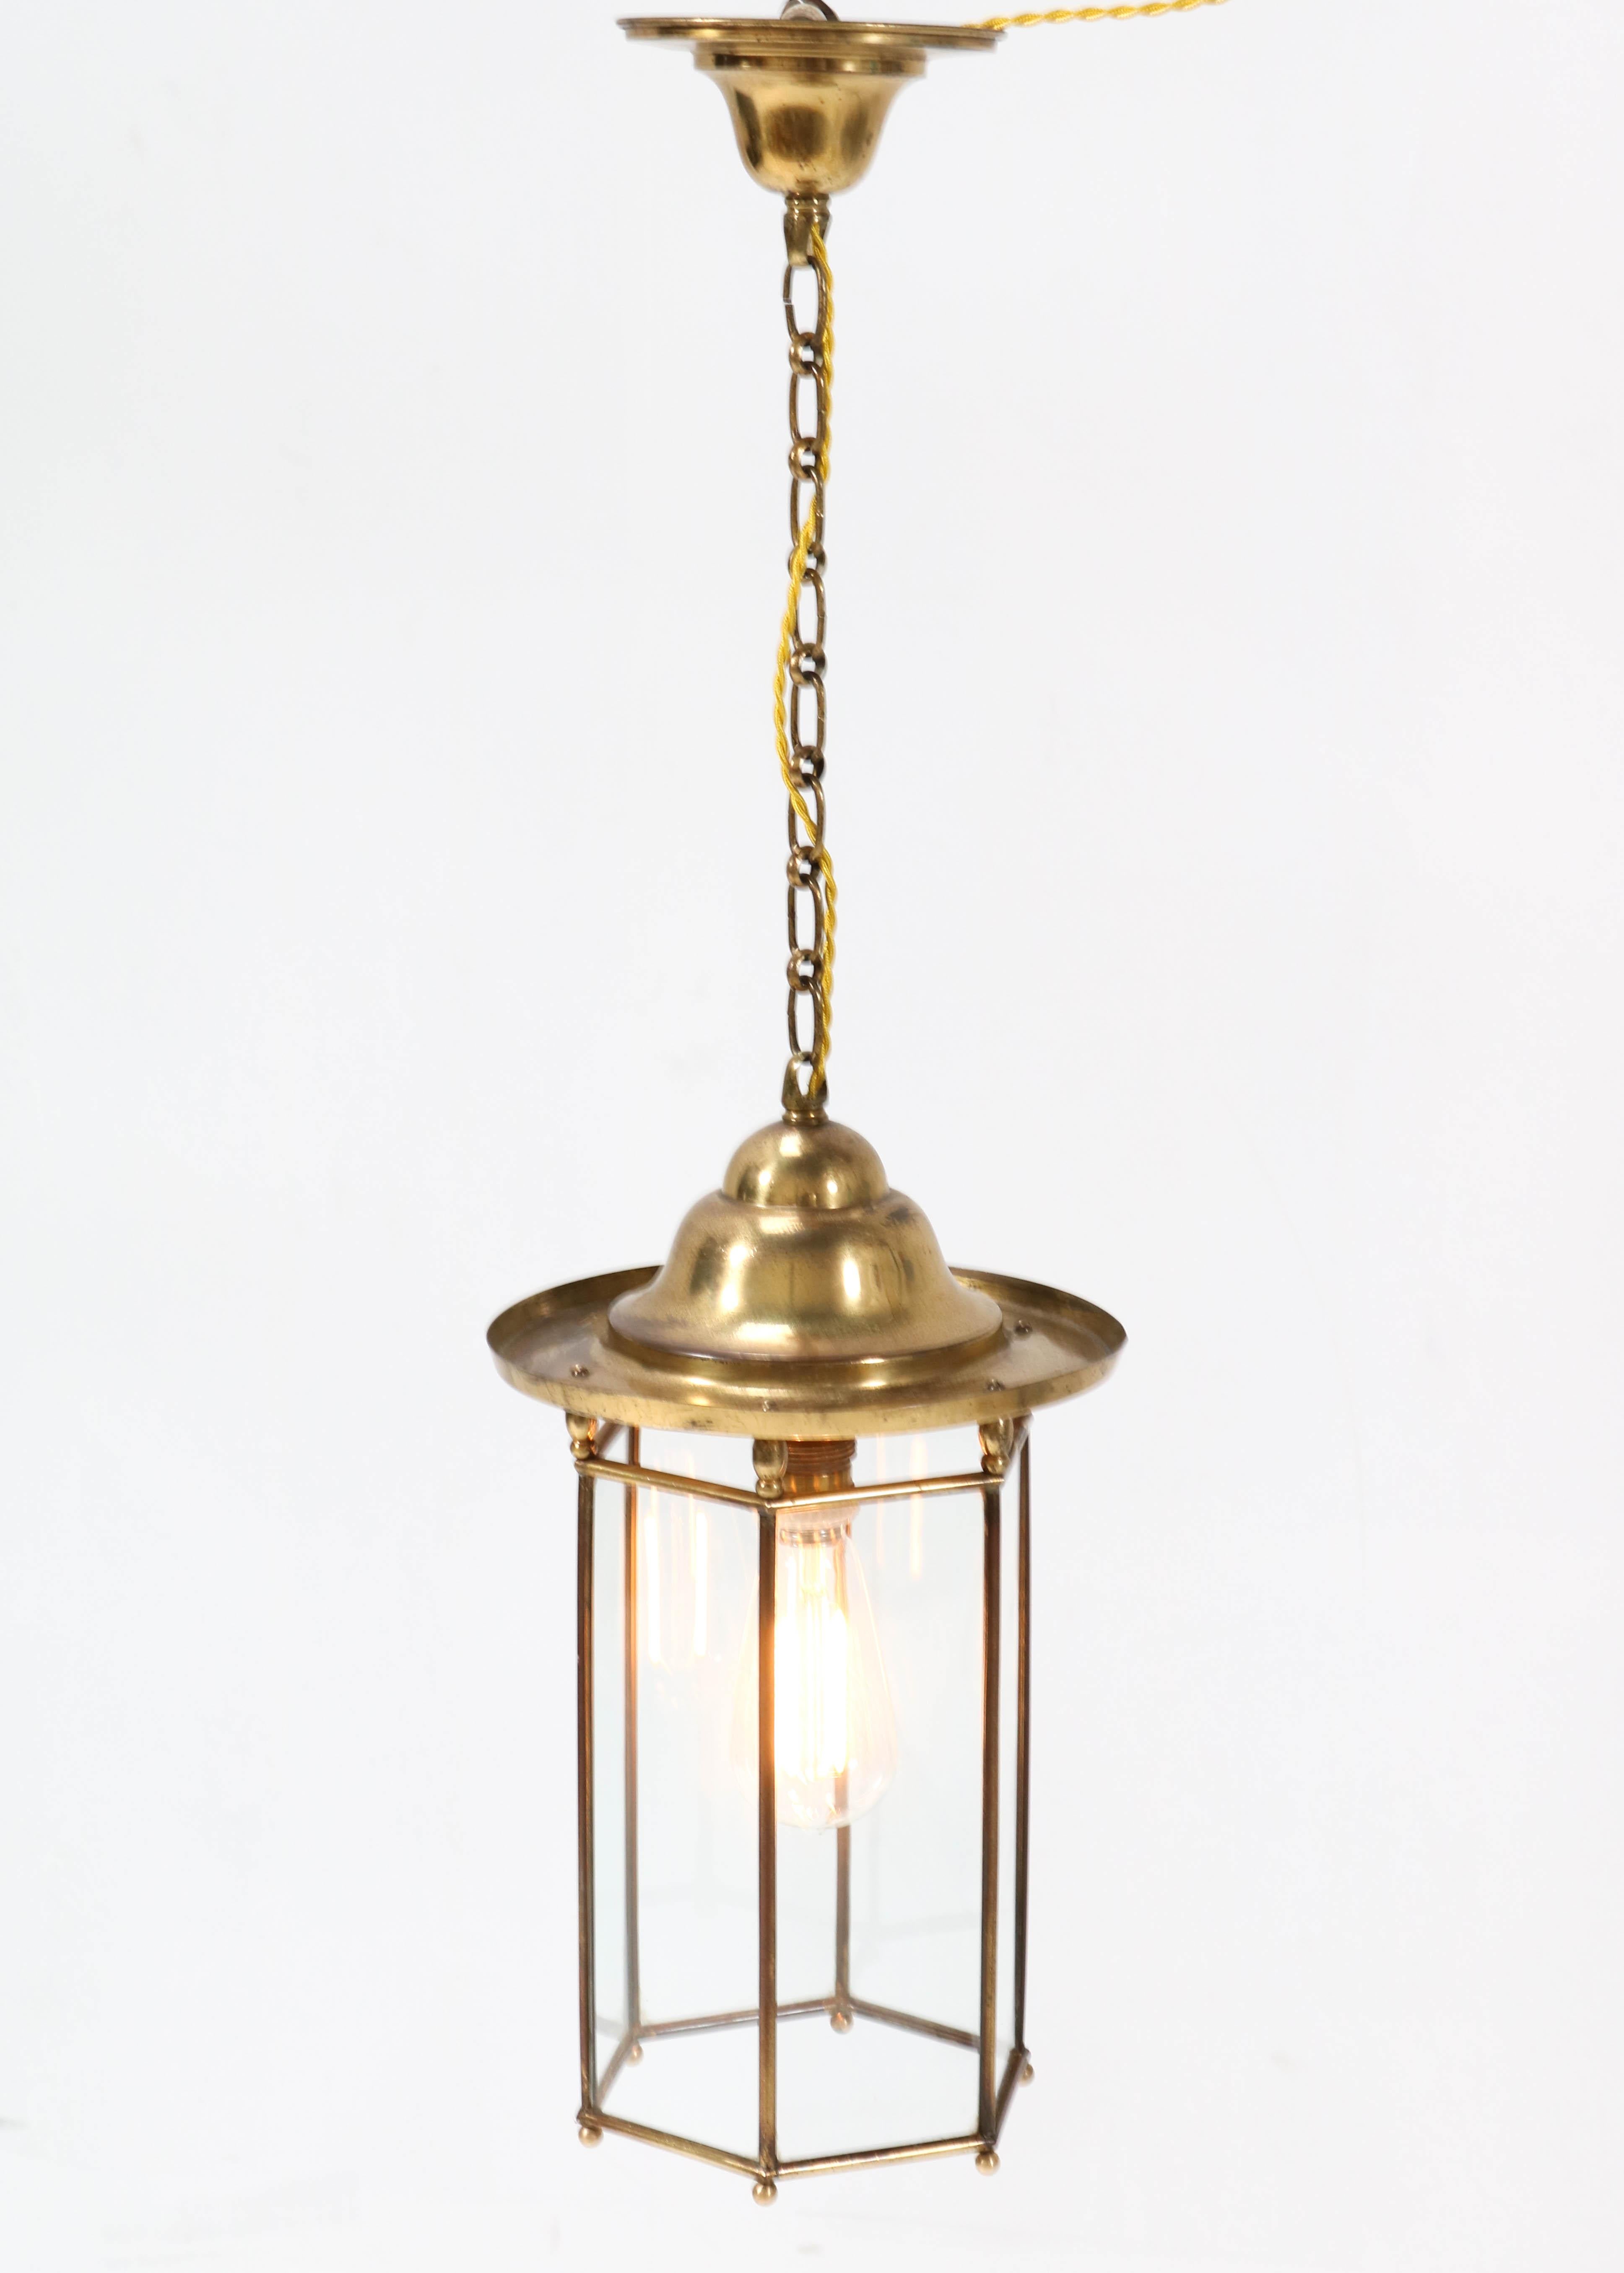 Brass Art Nouveau Lantern, 1900s In Good Condition For Sale In Amsterdam, NL